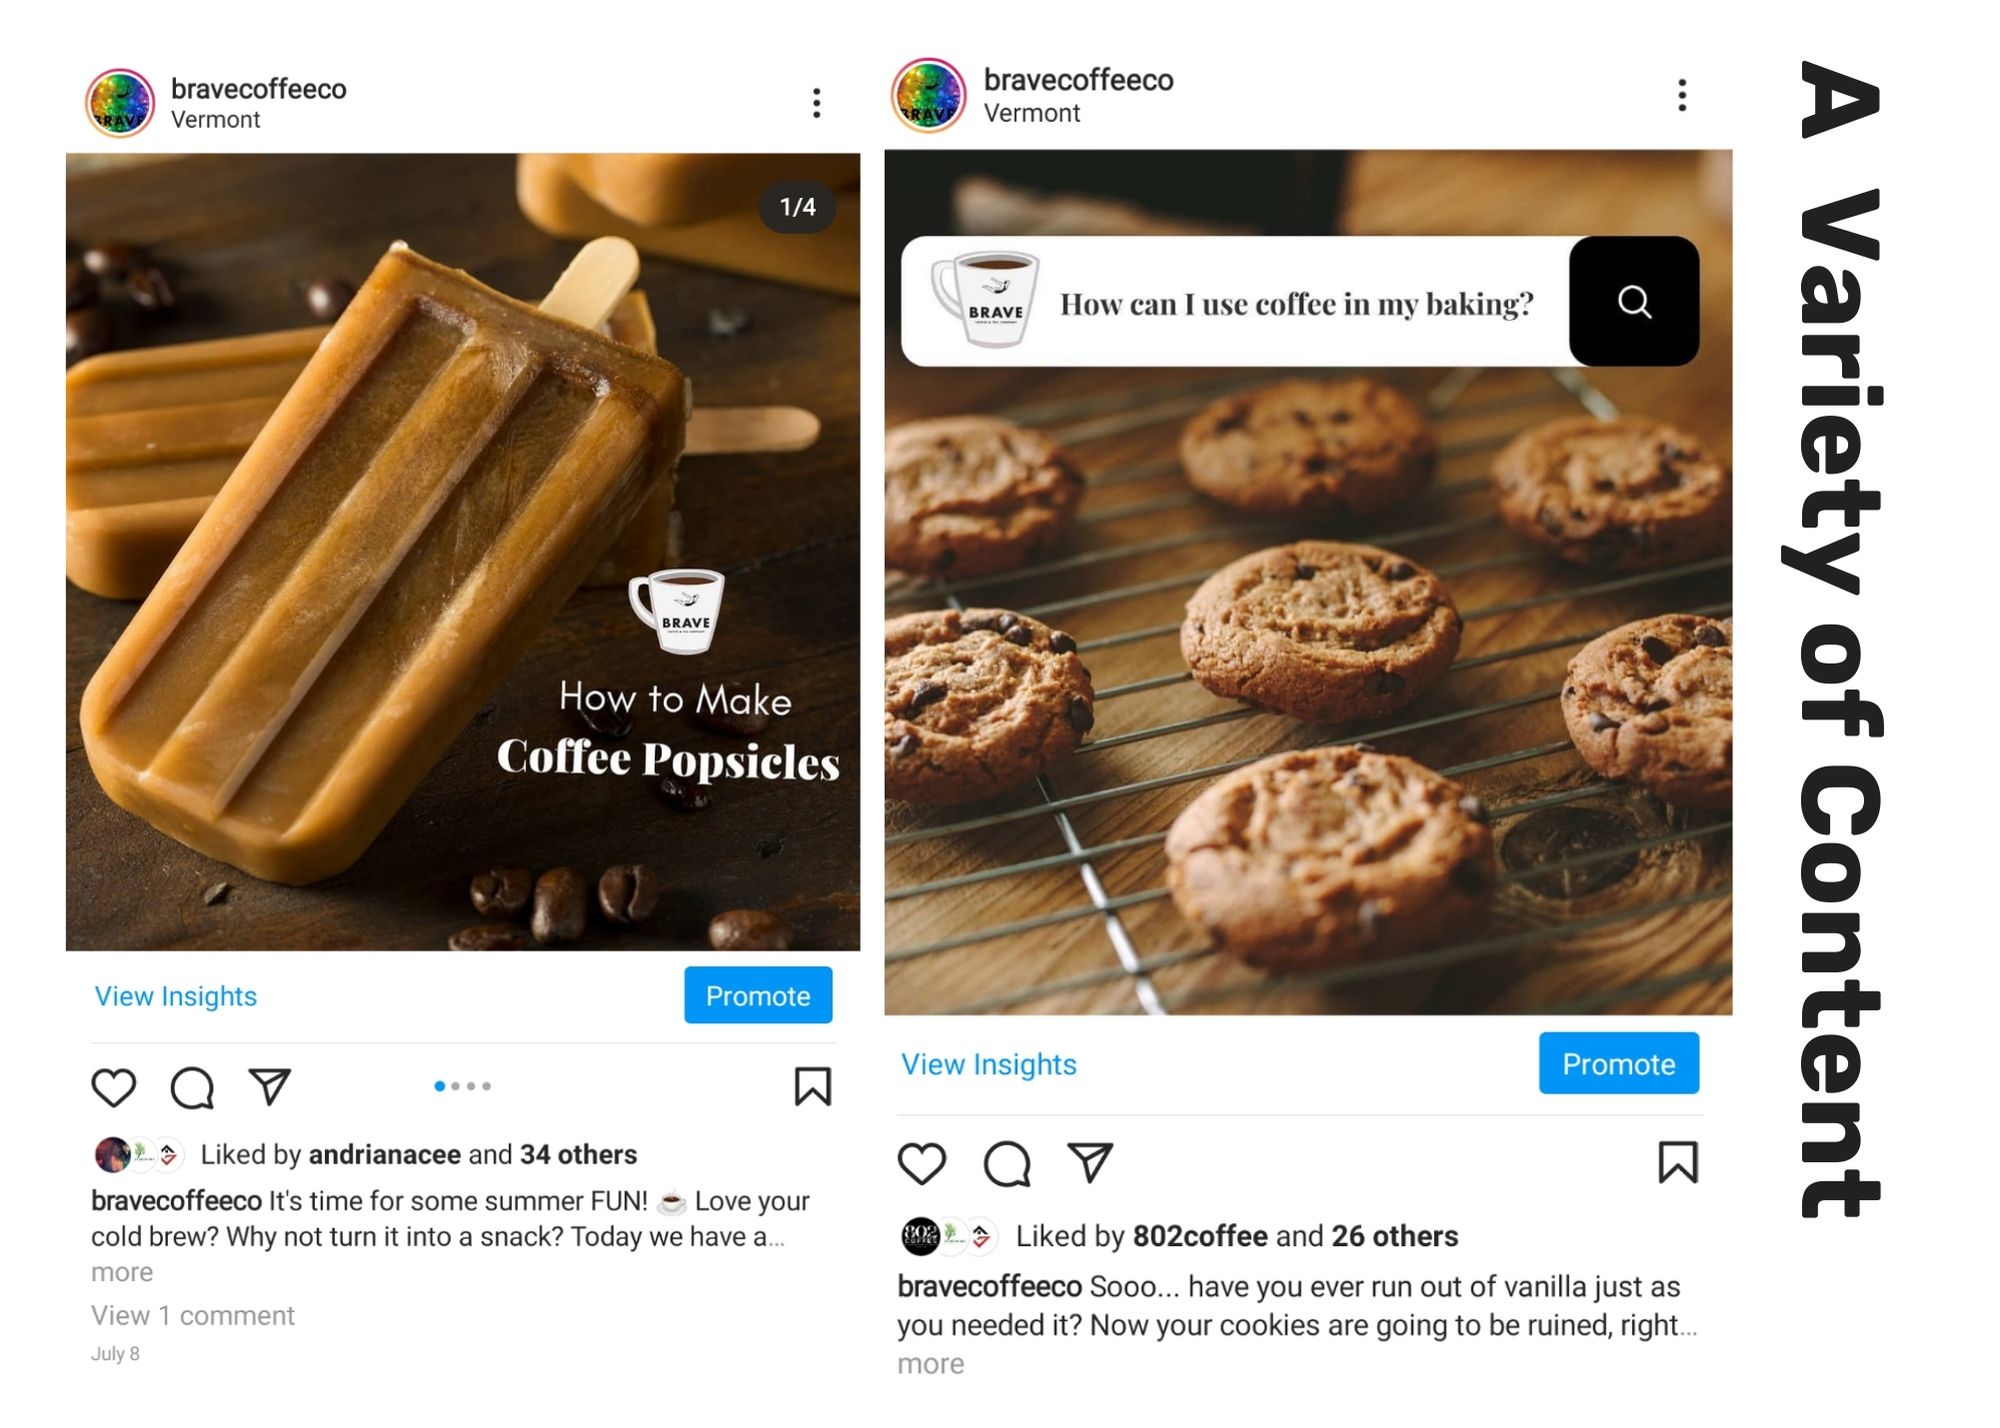 Examples of Brave Coffee Co social media posts